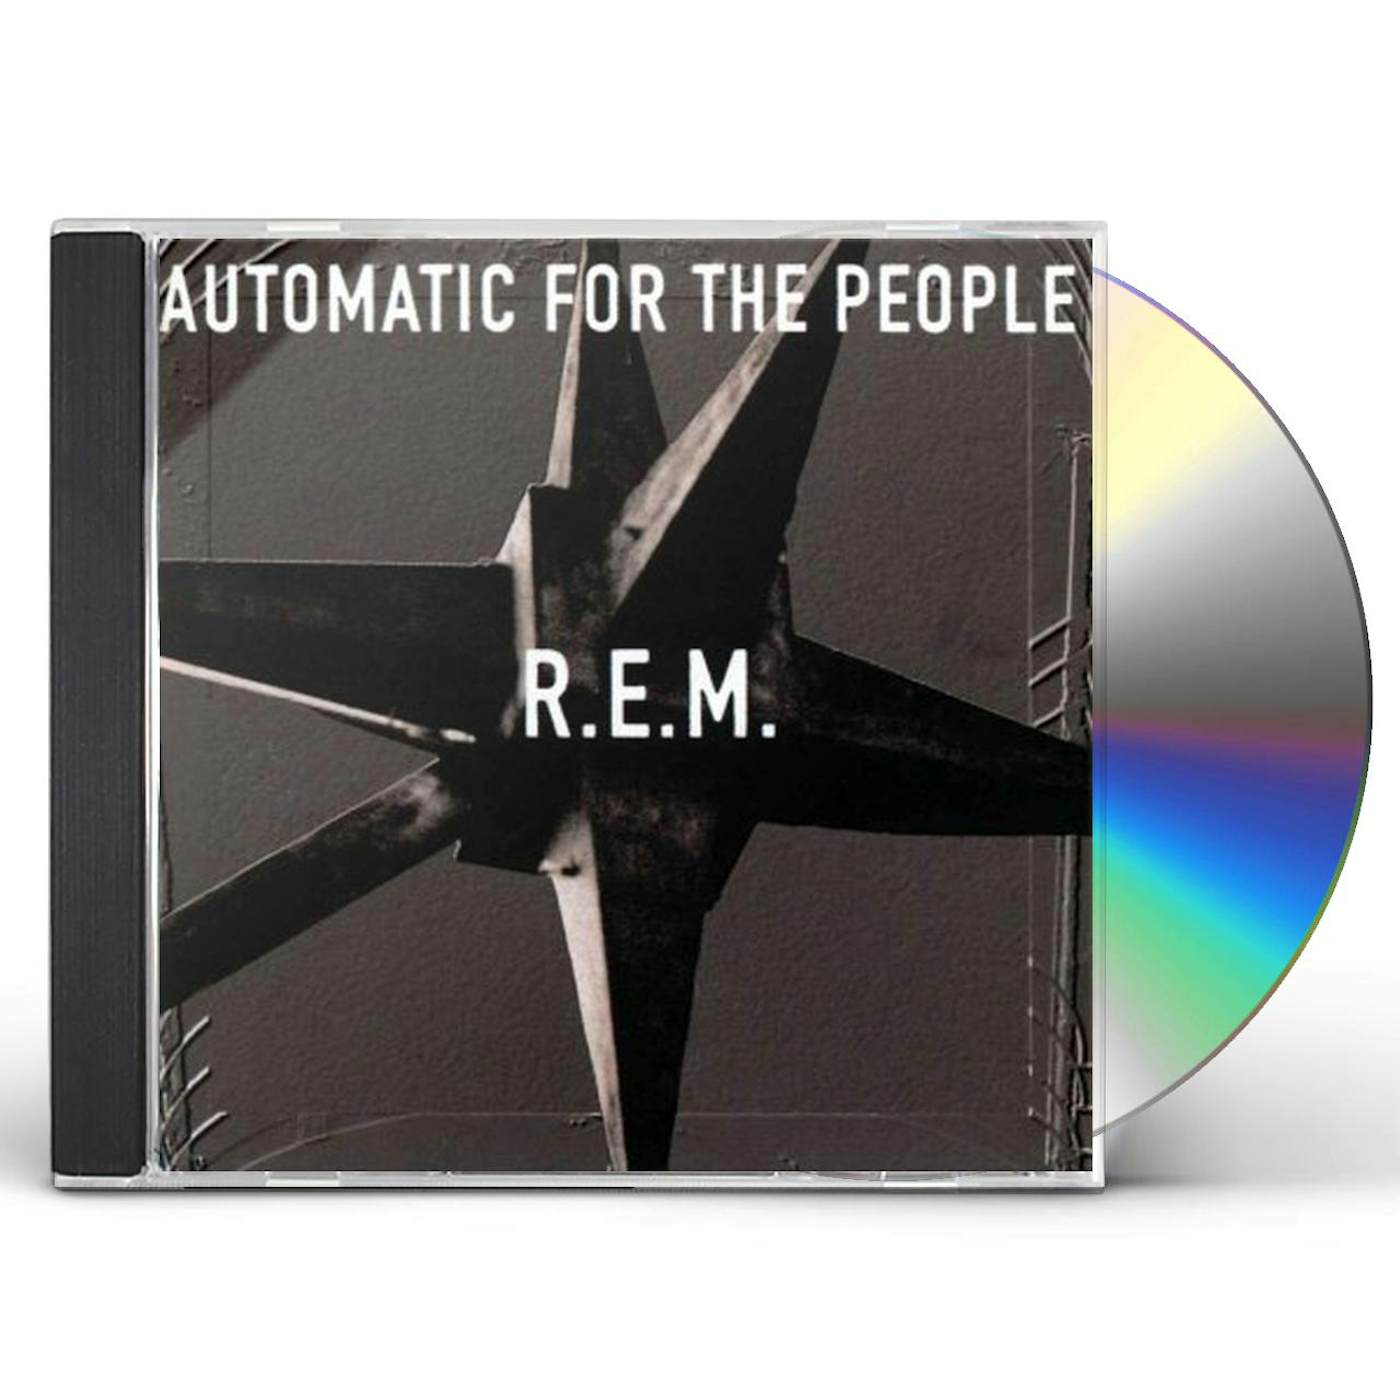 r.e.m. - automatic for the people (25th anniversary vinyl